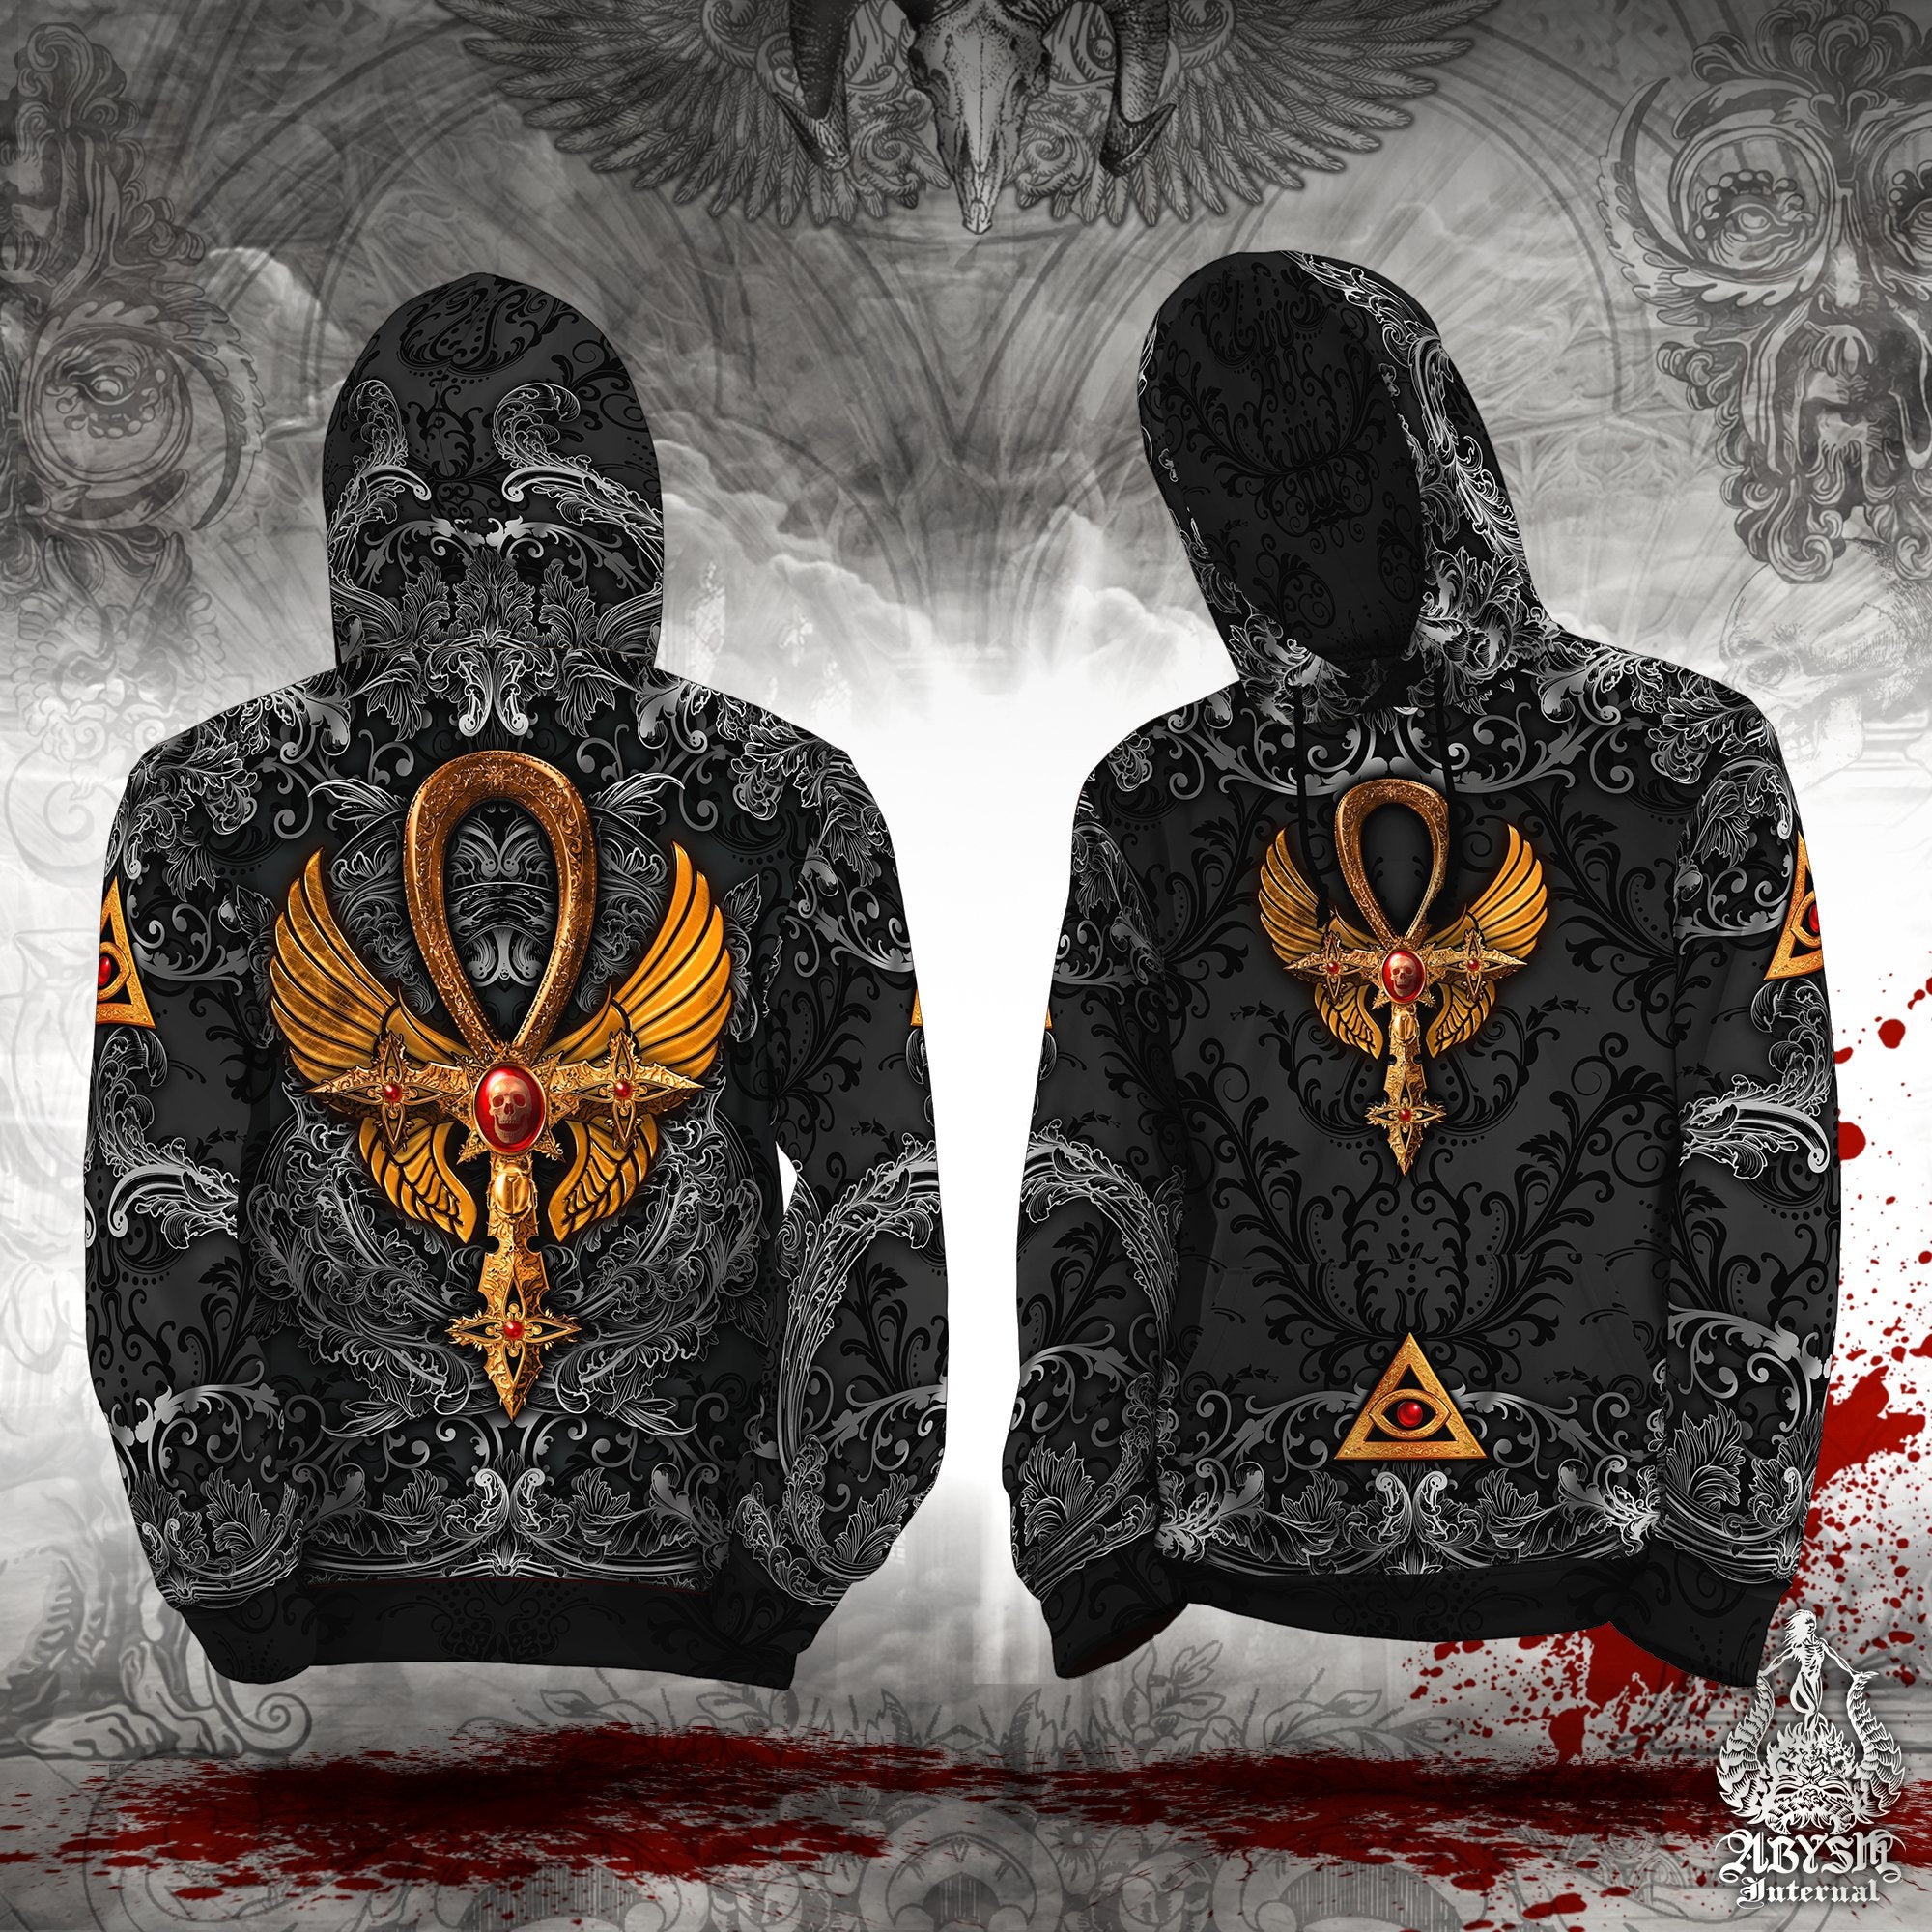 Gothic Hoodie, Black Sweater, Goth Streetwear, Dark Skater Pullover, Alternative Clothing, Unisex - Ankh Cross, Red, White or Gold, 3 Colors - Abysm Internal